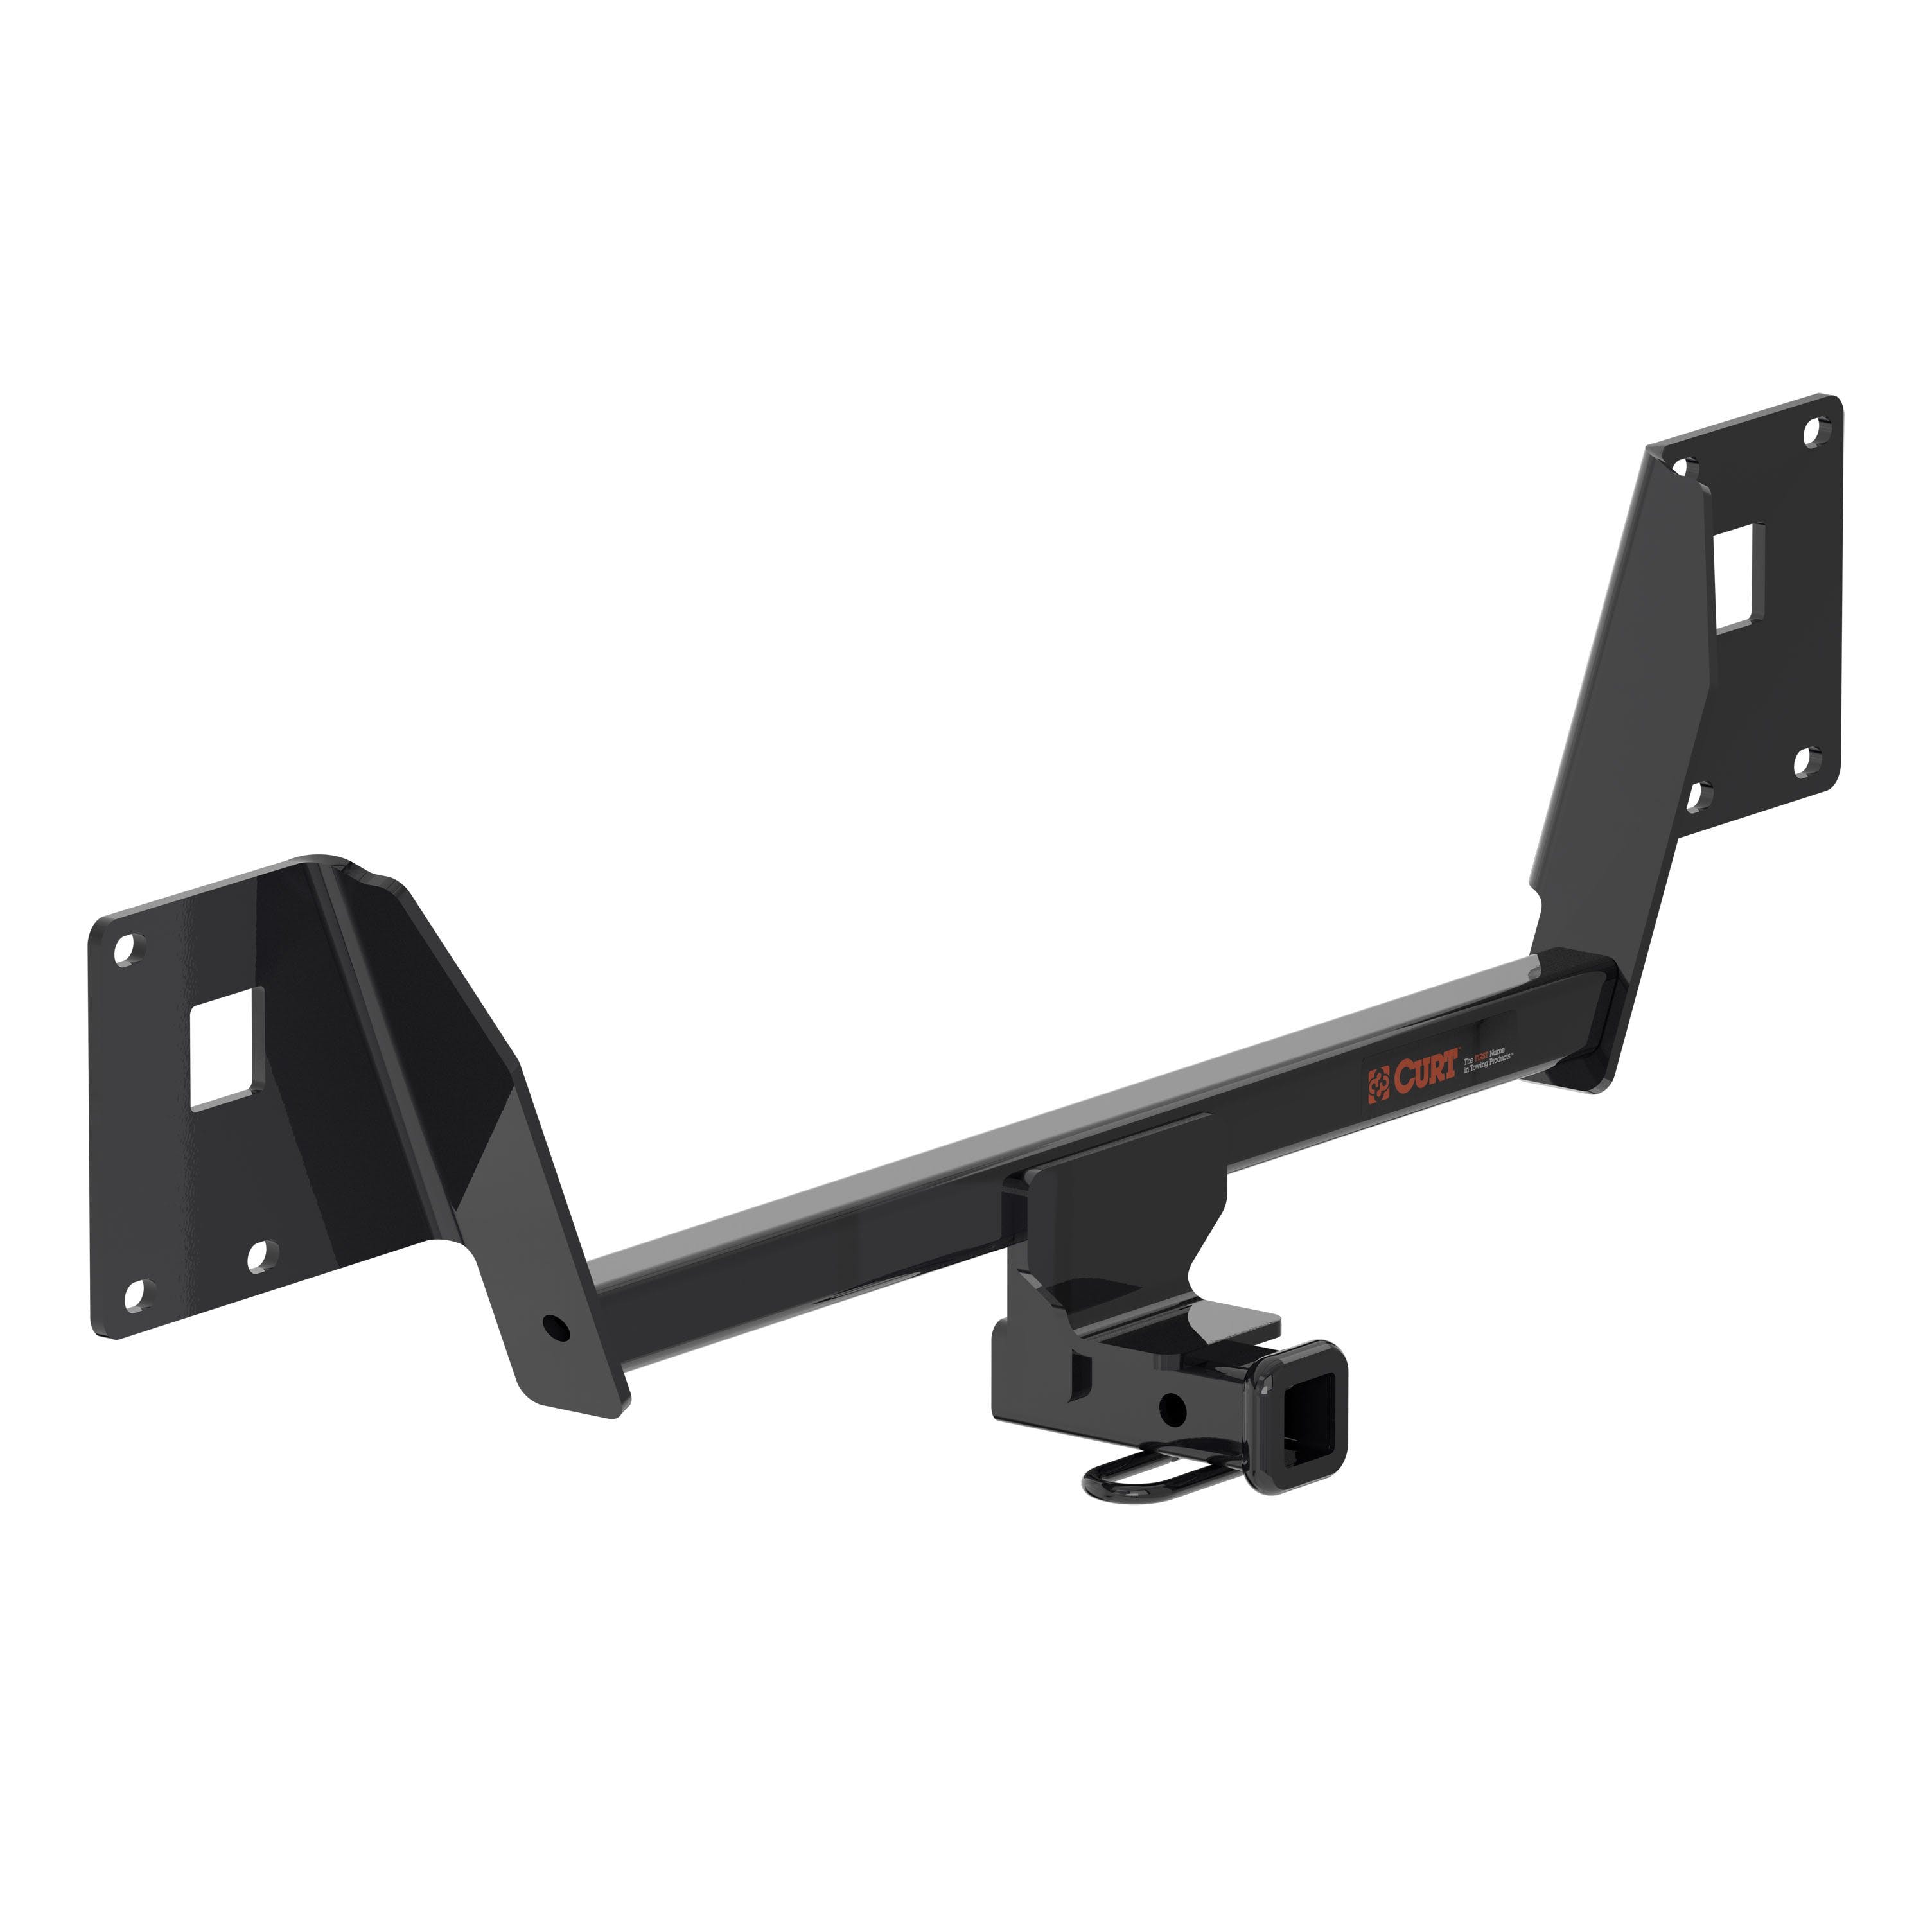 CURT 11564 Class 1 Hitch, 1-1/4 Receiver, Select Volkswagen Golf R (Concealed Main Body)